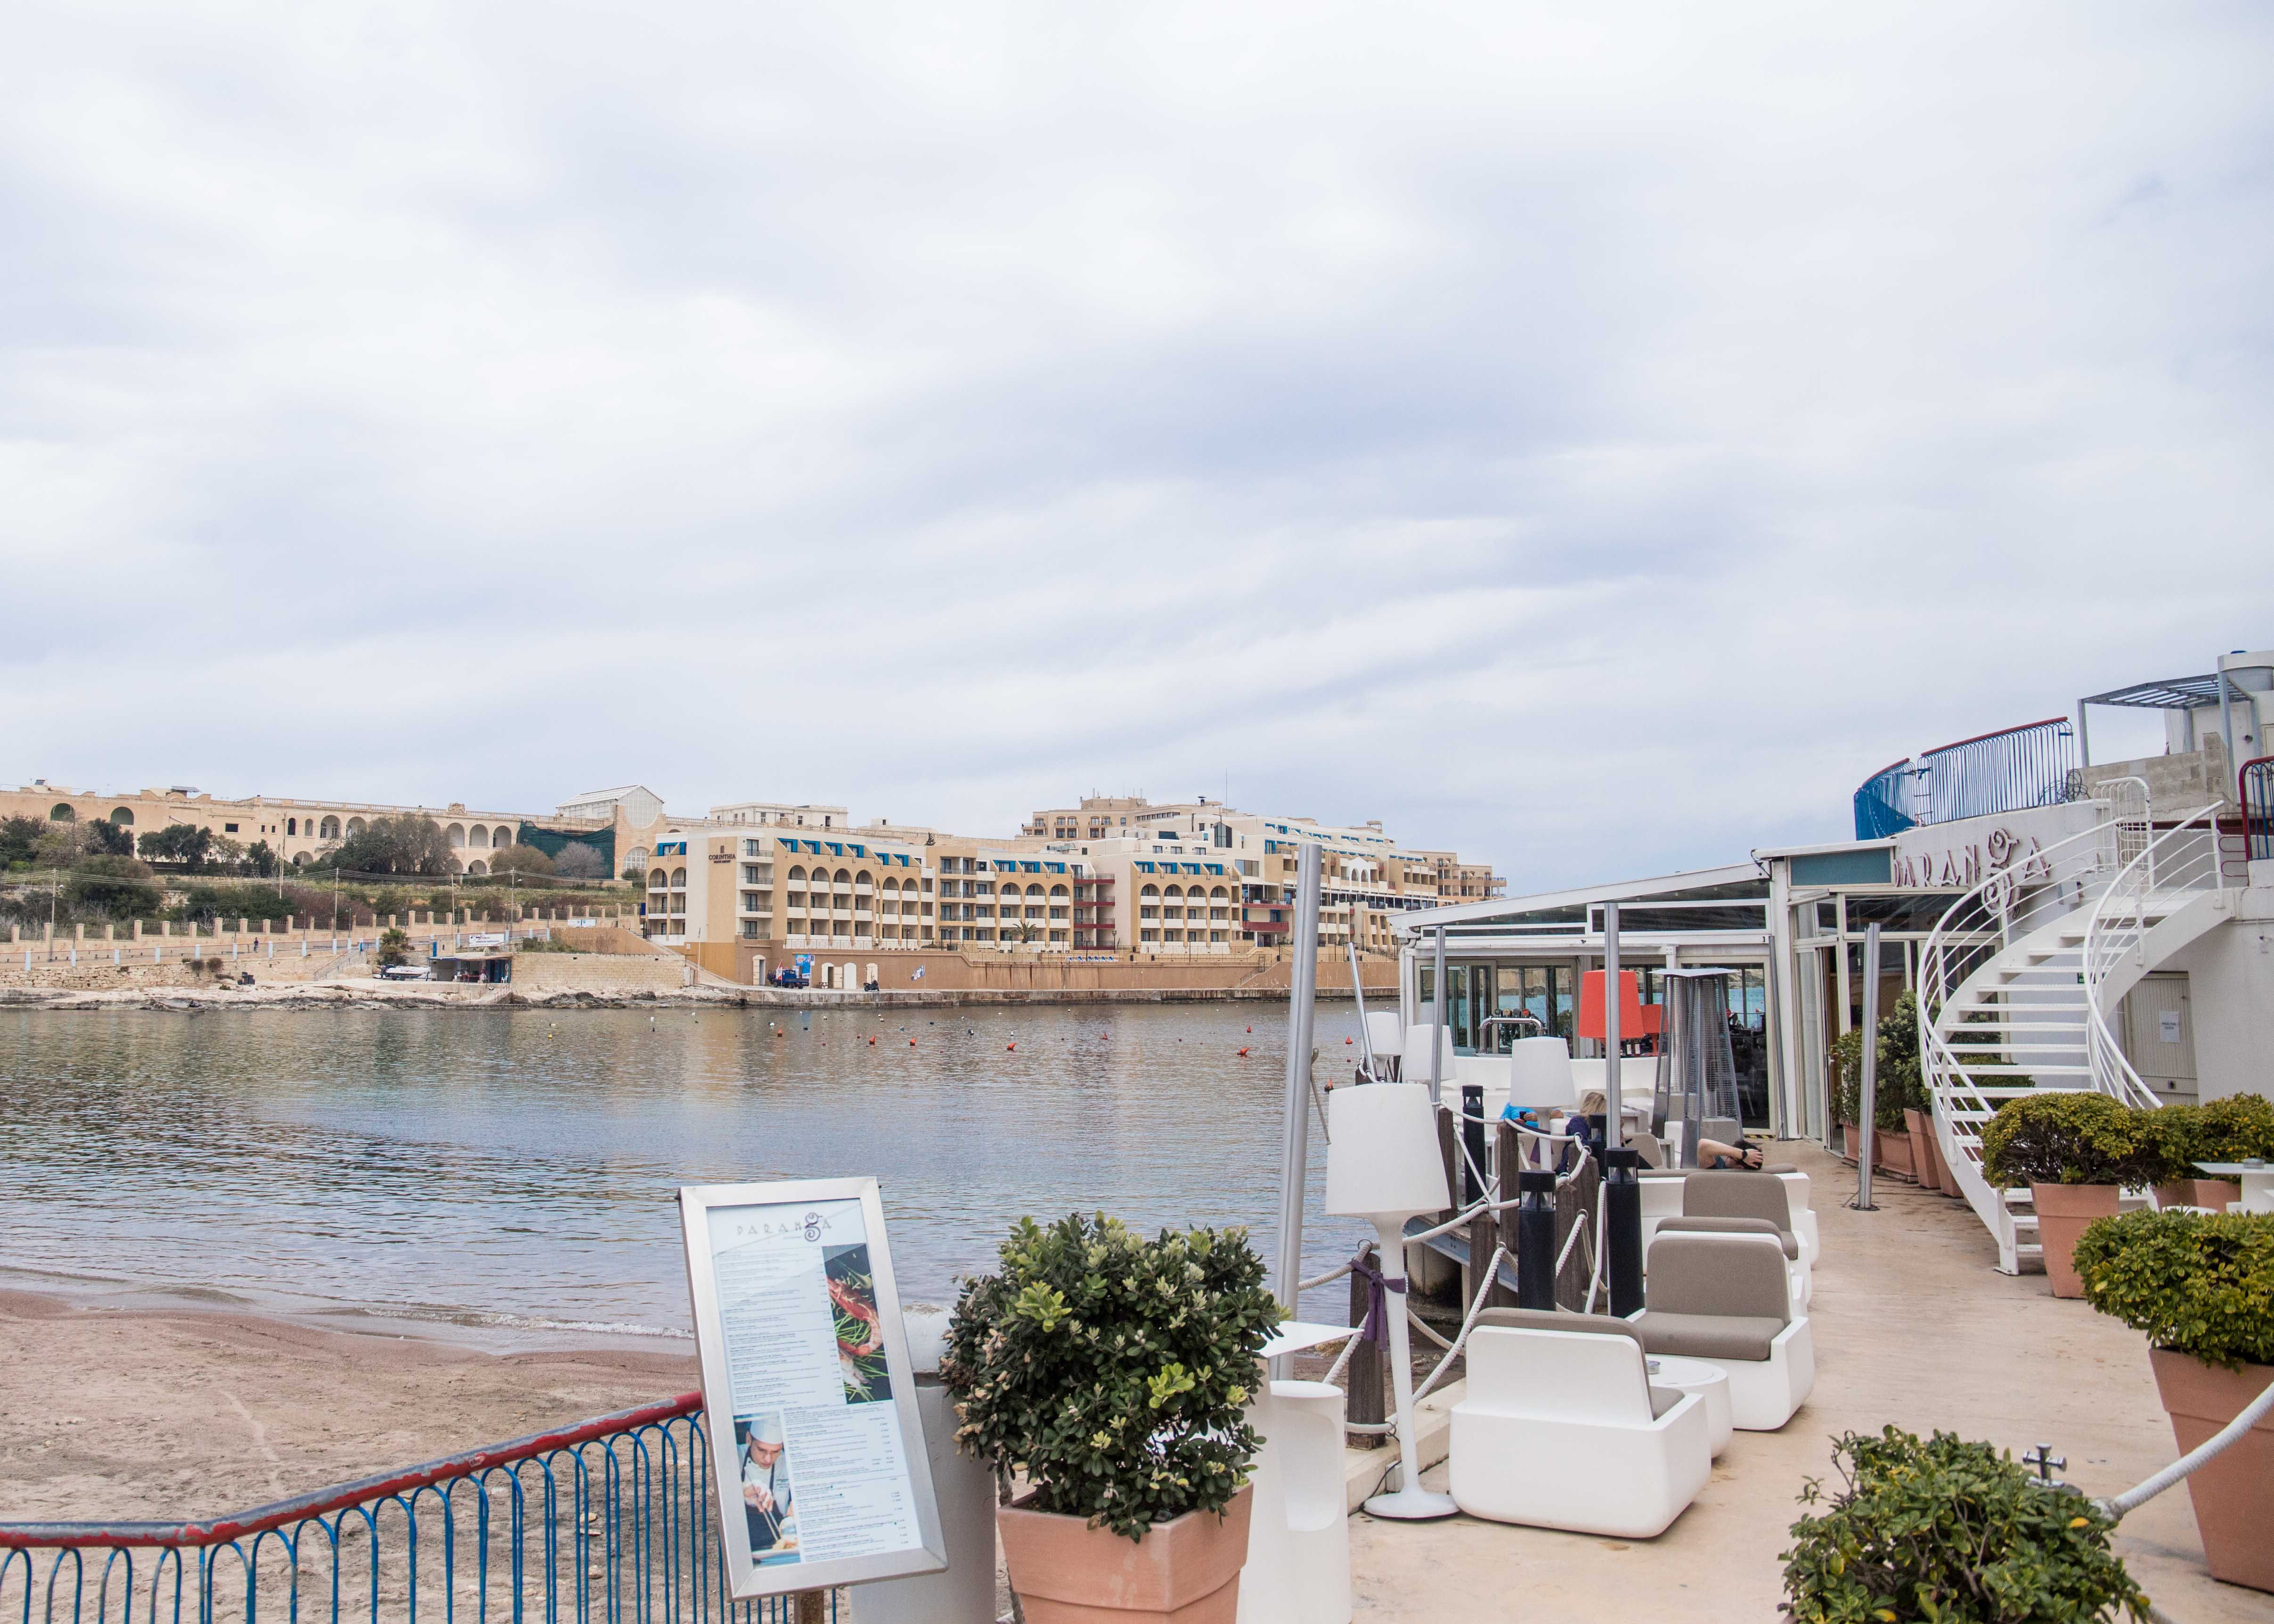 Where to visit in Malta? St. George's Bay